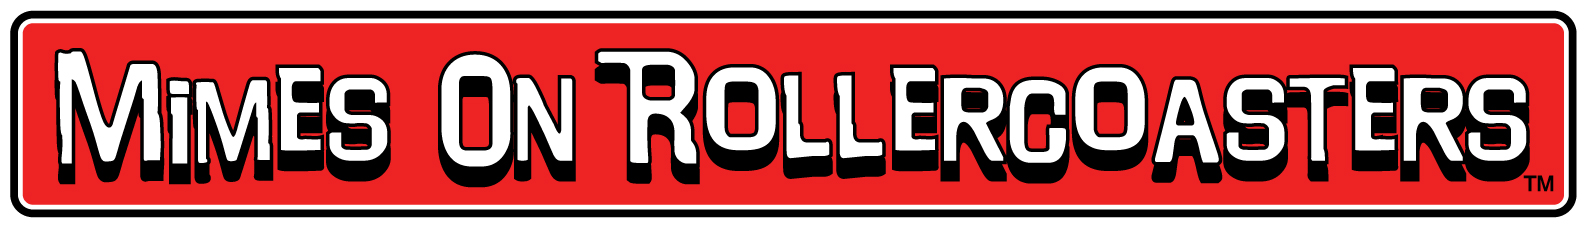 Mimes On Rollercoasters™ Logo